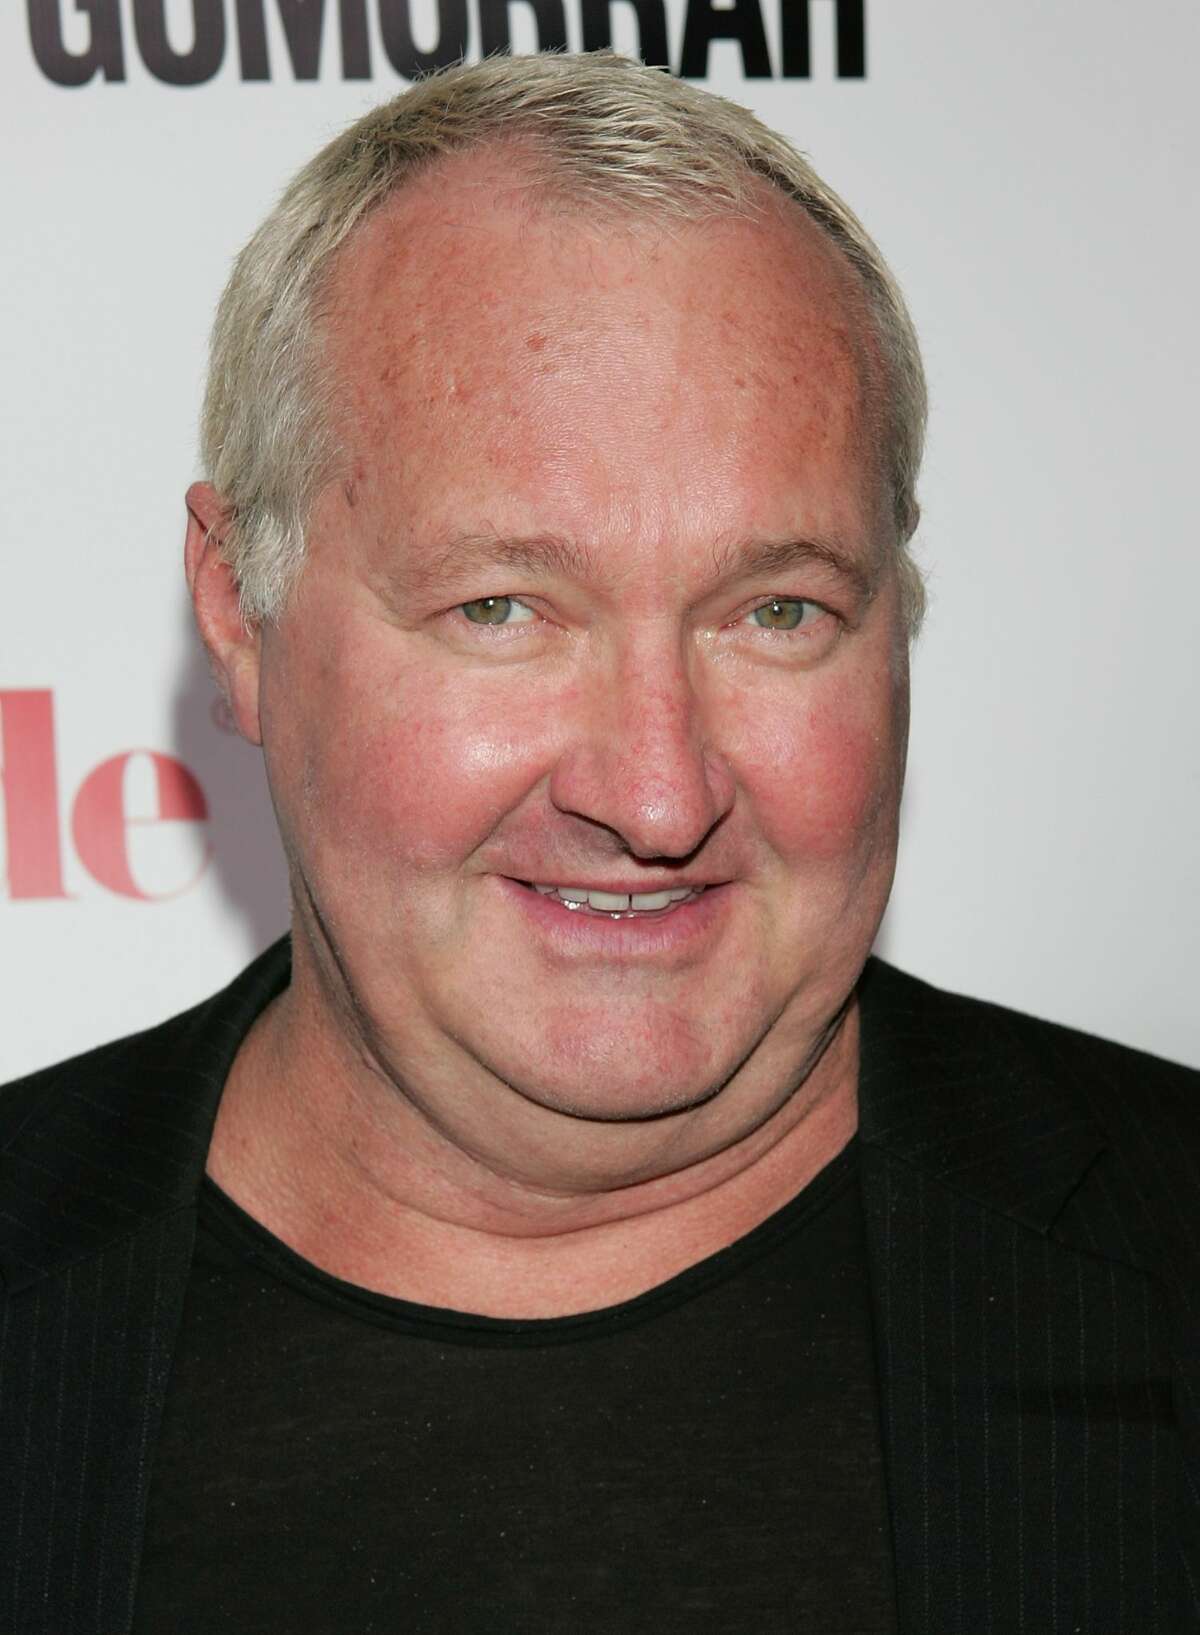 HOLLYWOOD - NOVEMBER 11: Actor Randy Quaid attends American Cinematheque's screening of "Gomorrah" at the Egyptian Theater on November 11, 2008 in Hollywood, California. (Photo by David Livingston/Getty Images)